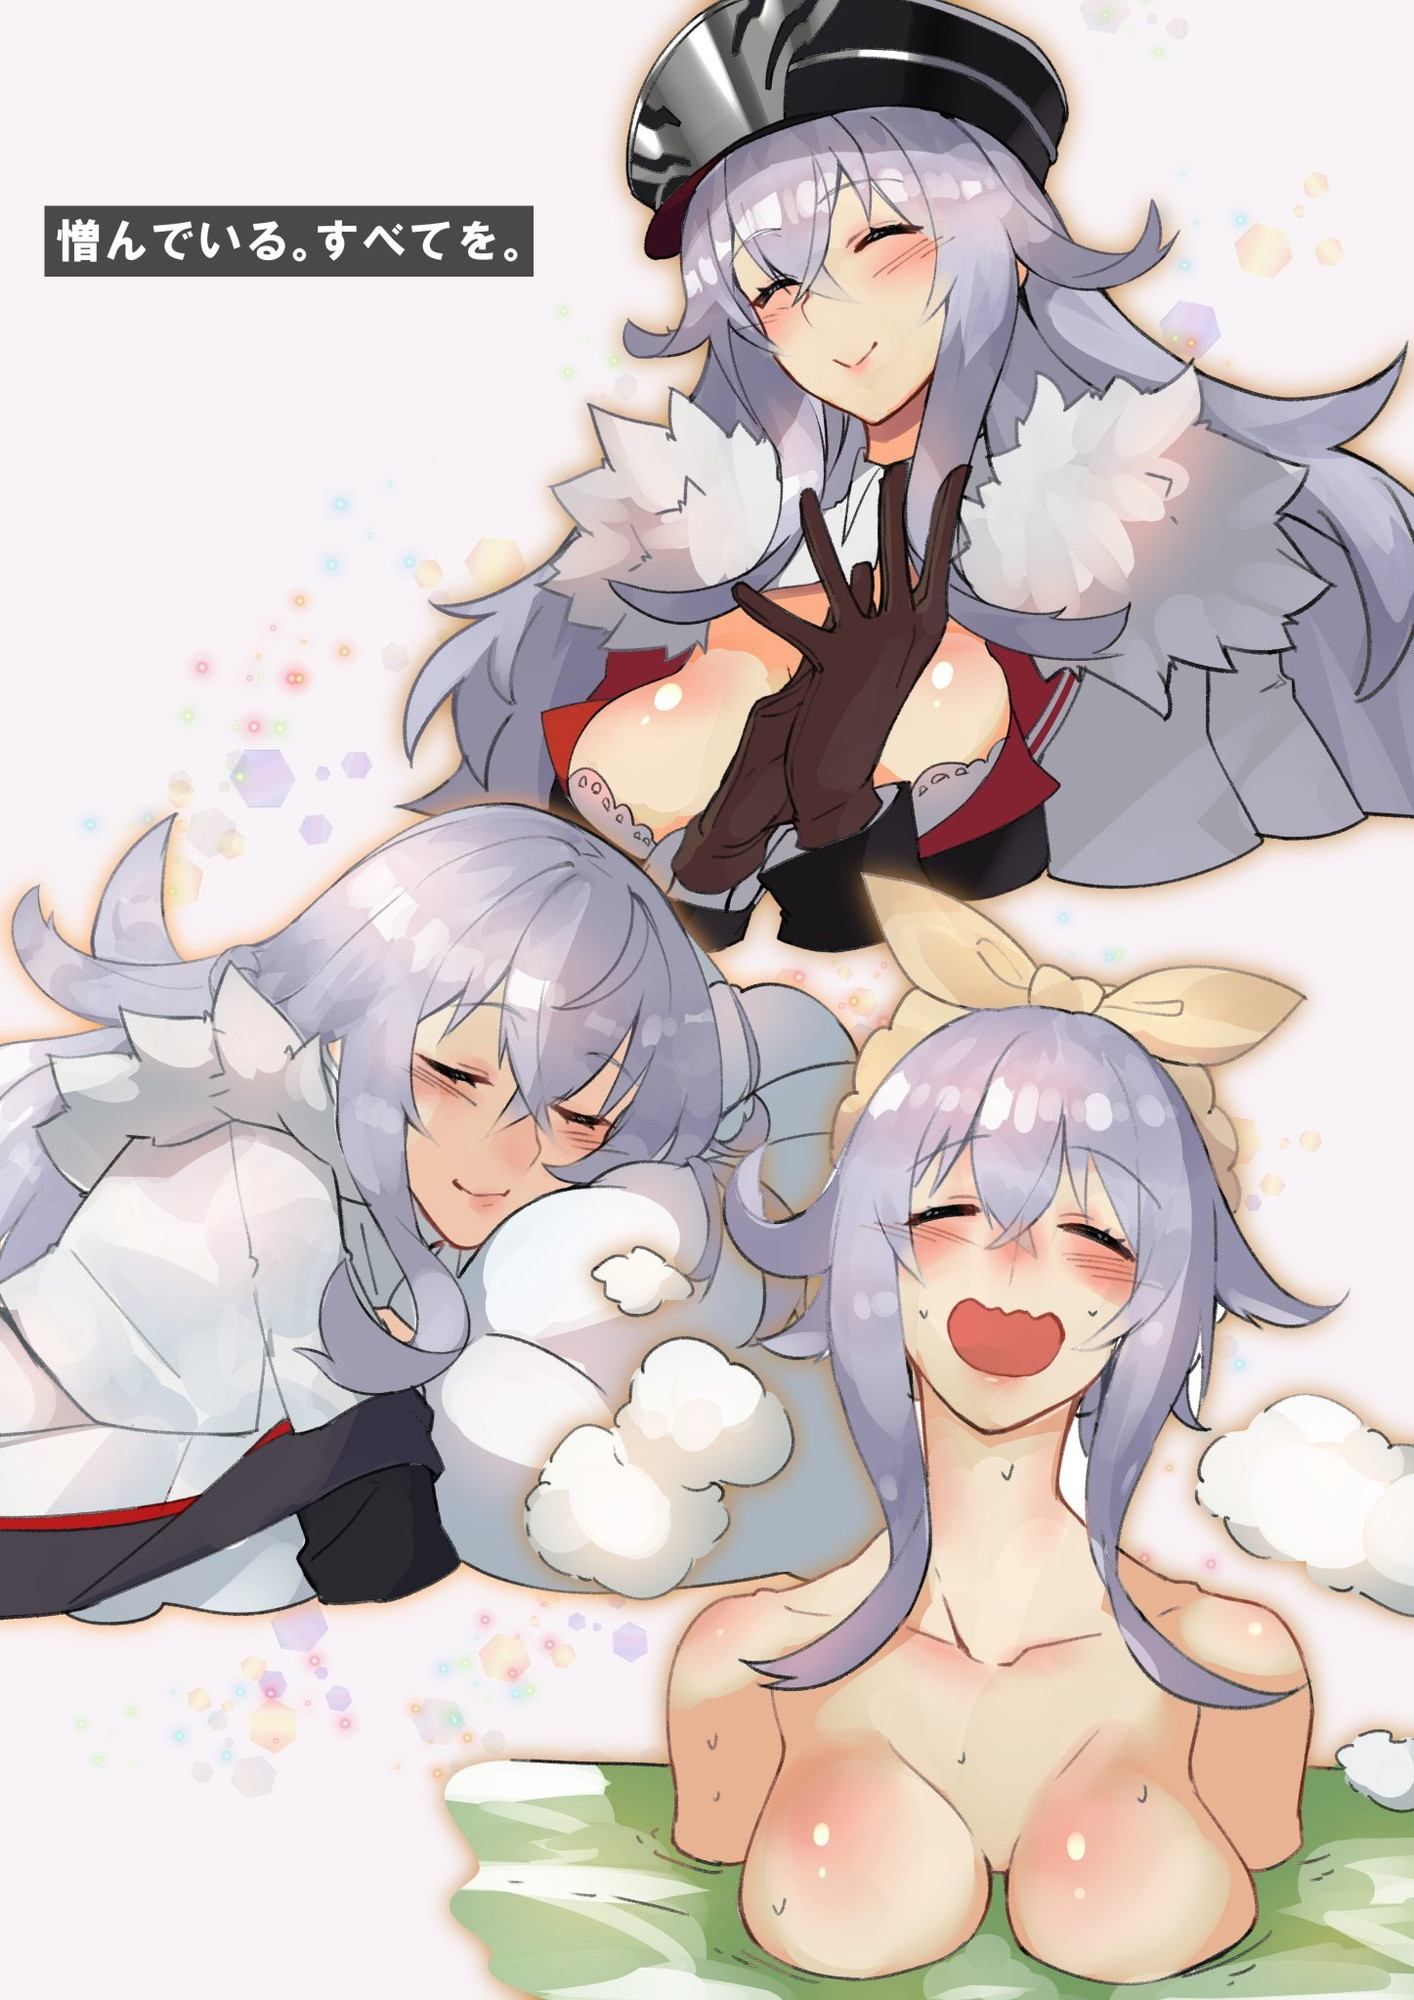 Cute two-dimensional image of Azur Lane. 11